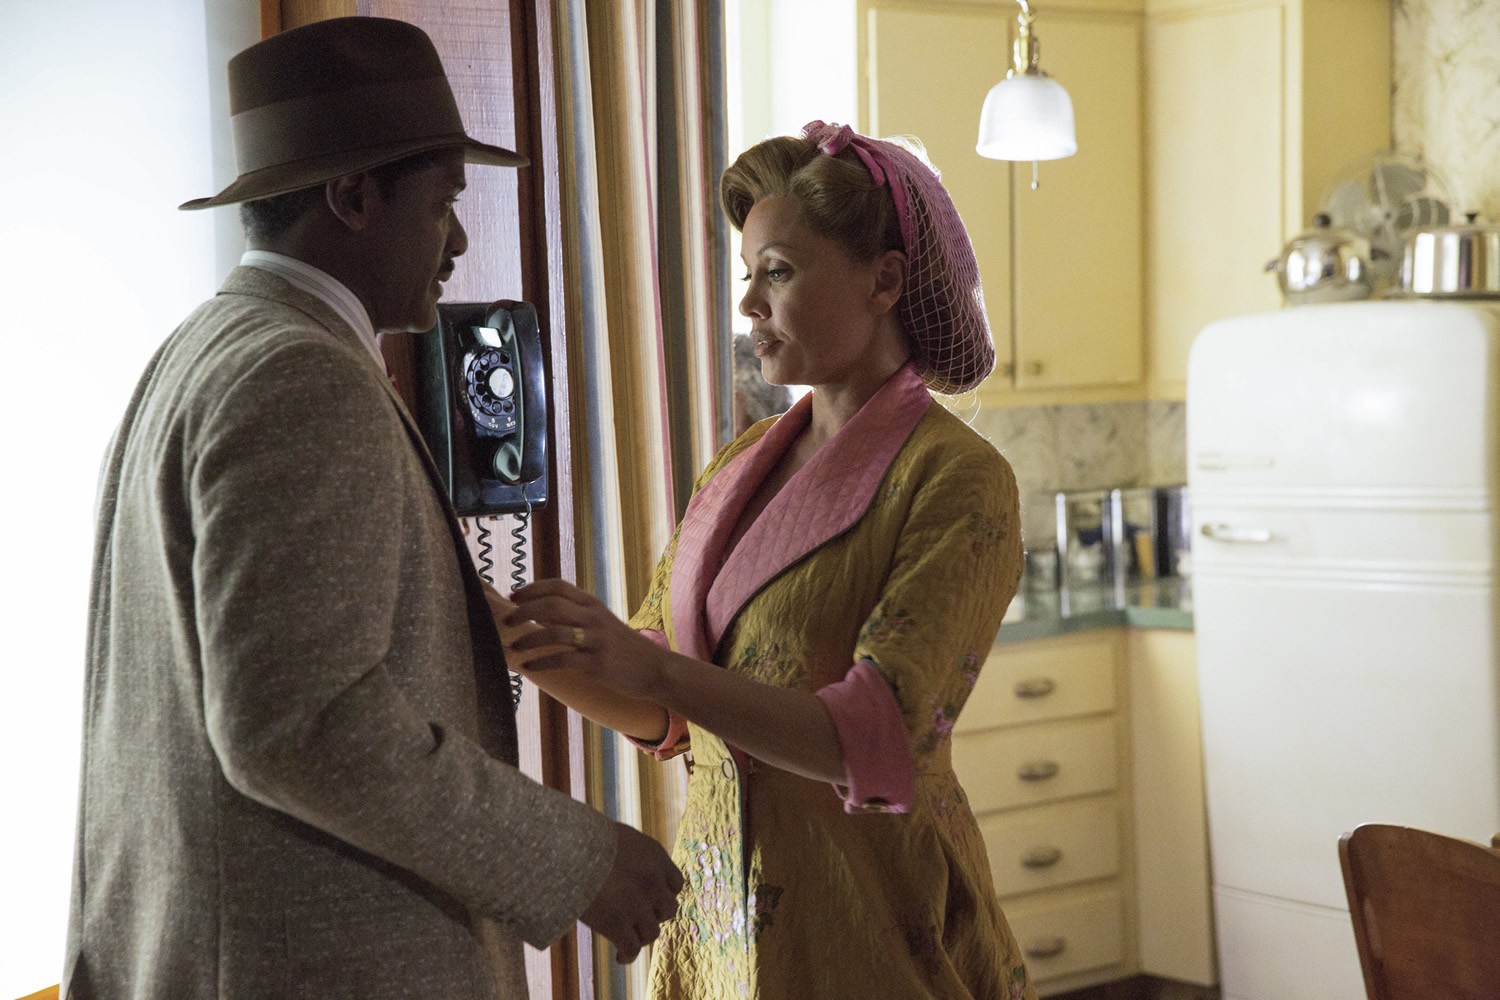 Blair Underwood stars as Ludie Watts and Vanessa Williams stars as Jessie Mae Watts in Lifetime's The Trip to Bountiful (2014). Photo credit by Bob Mahoney.